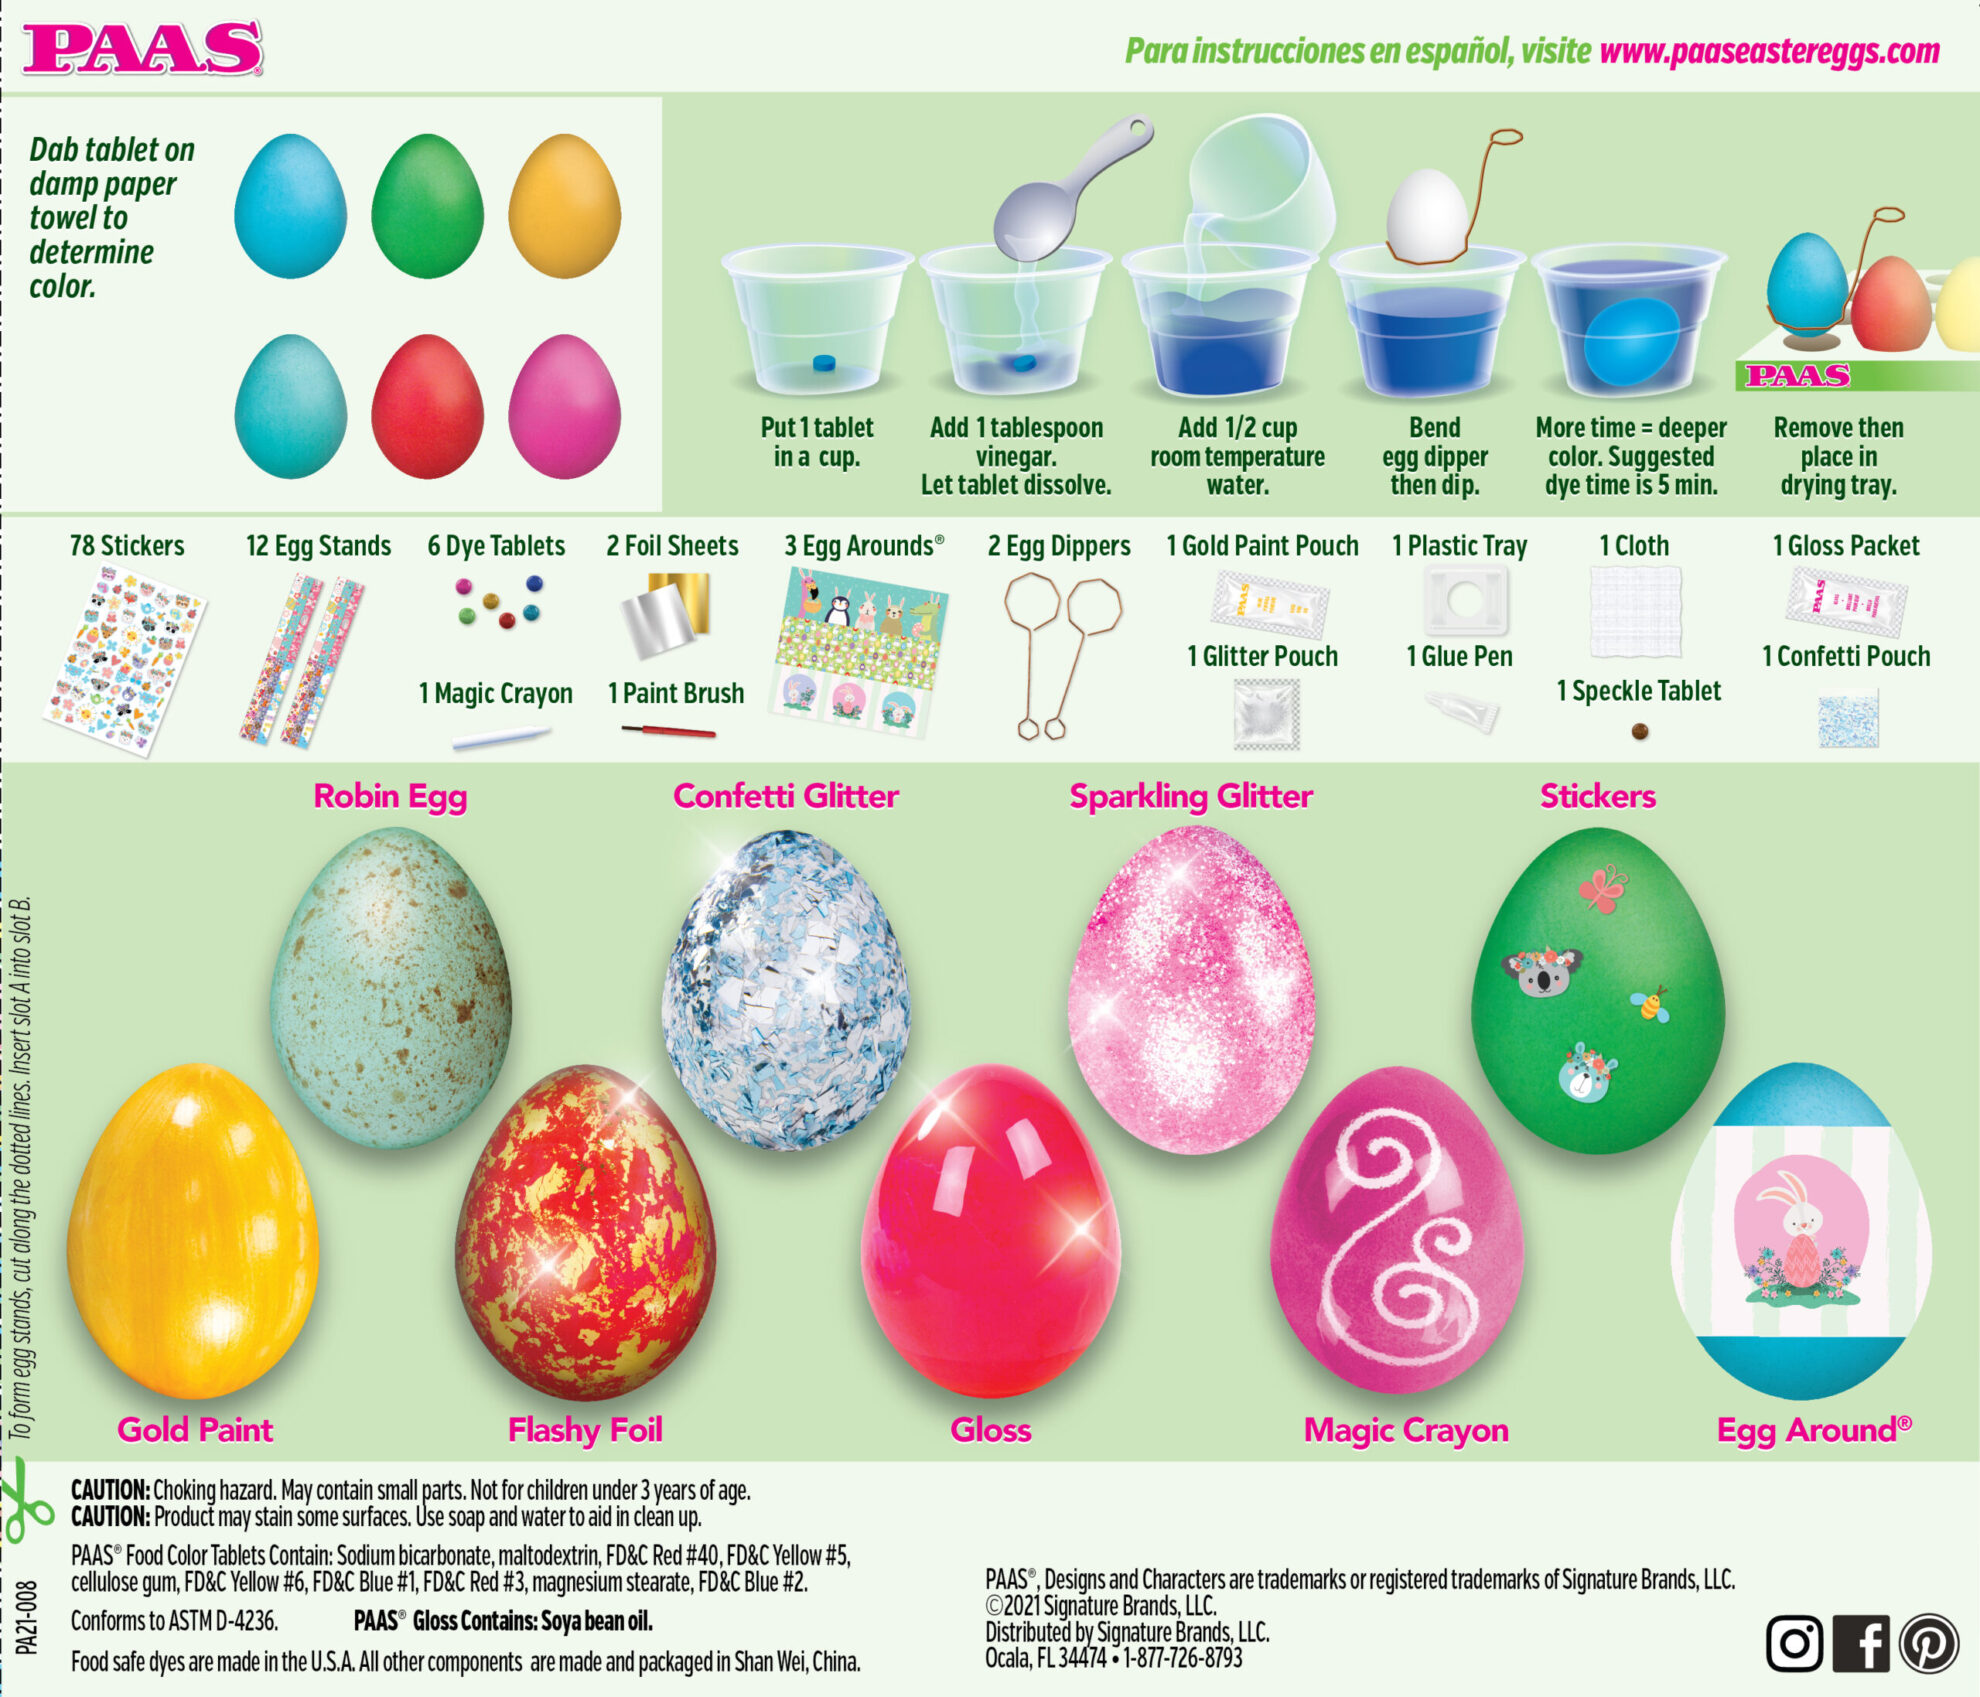 7-SET PAAS DELUXE EASTER EGGS DECORATING KITS Gold Tie Dye Glitter Marble NEW 